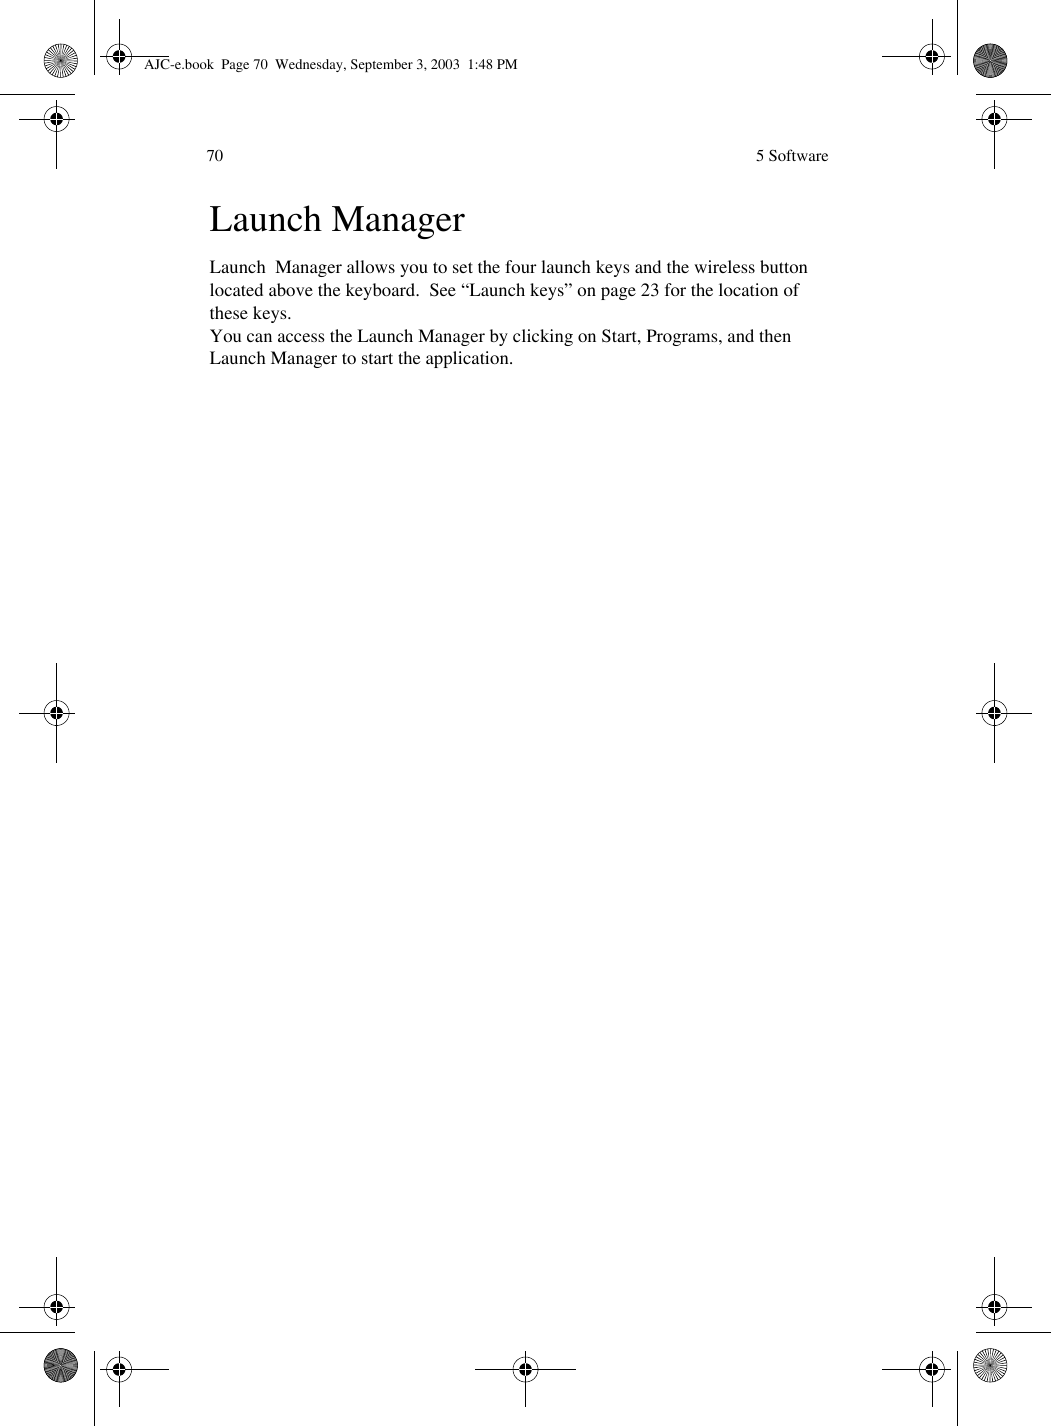  5 Software70Launch ManagerLaunch  Manager allows you to set the four launch keys and the wireless button located above the keyboard.  See “Launch keys” on page 23 for the location of these keys.  You can access the Launch Manager by clicking on Start, Programs, and then Launch Manager to start the application. AJC-e.book  Page 70  Wednesday, September 3, 2003  1:48 PM